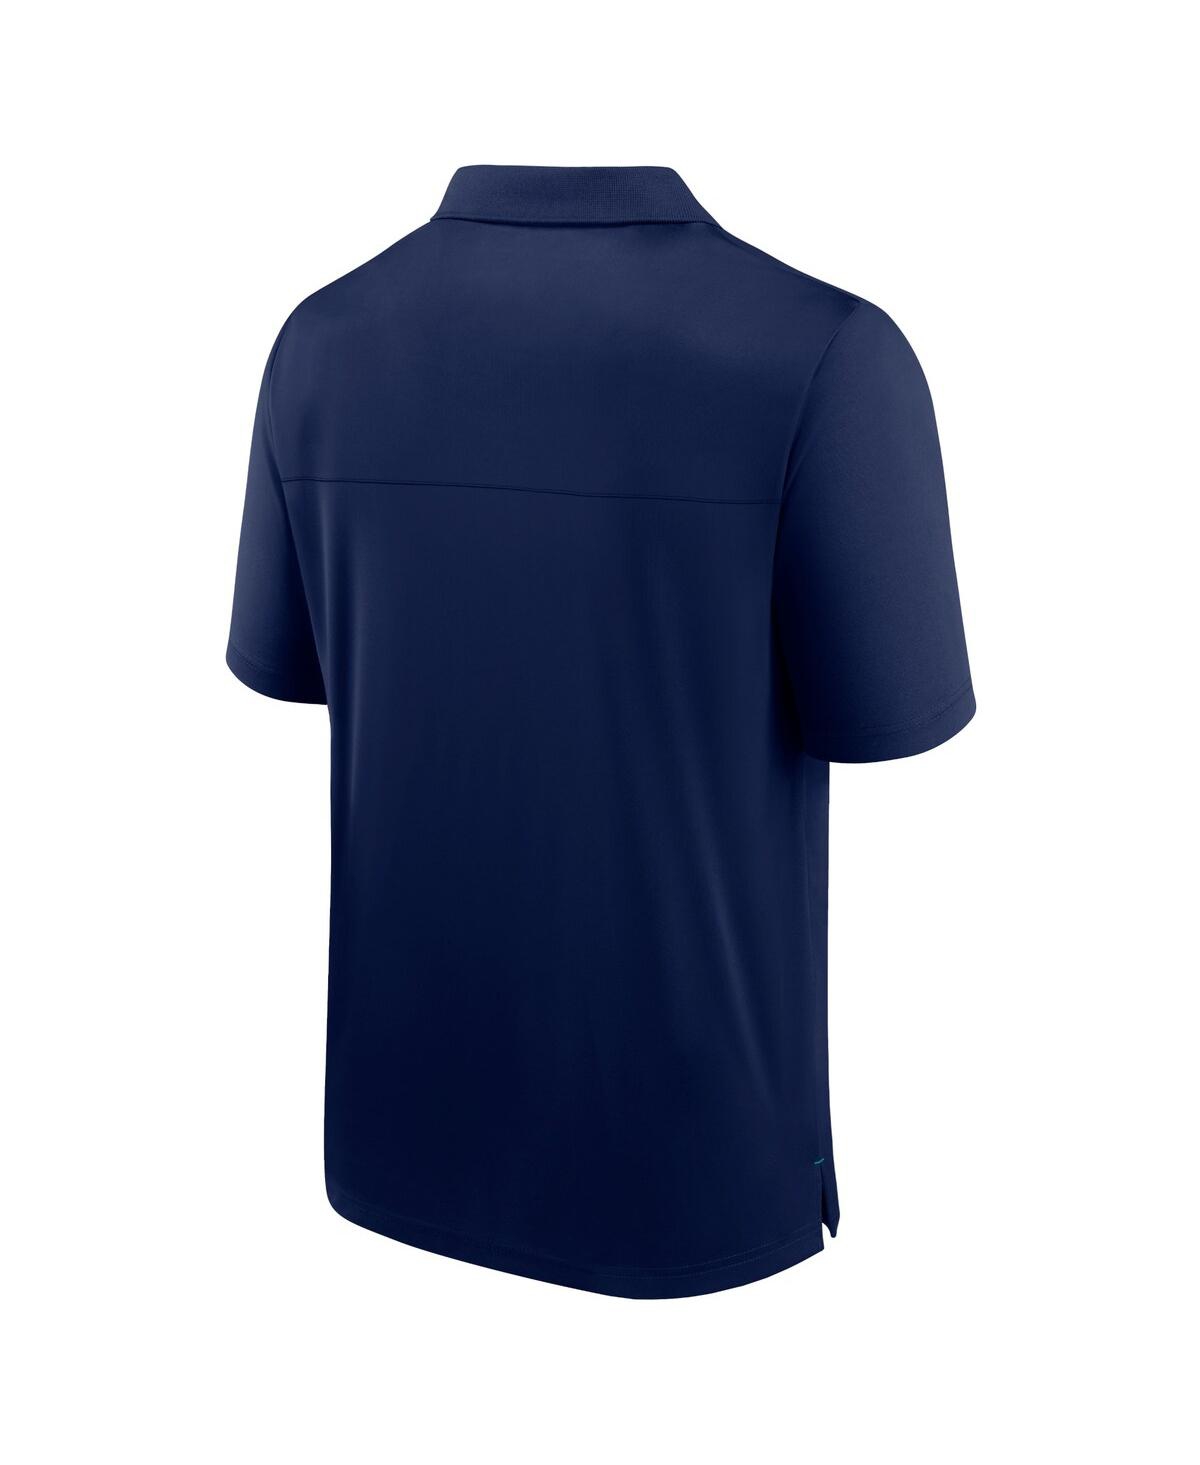 Shop Fanatics Men's  Navy Seattle Mariners Fitted Polo Shirt